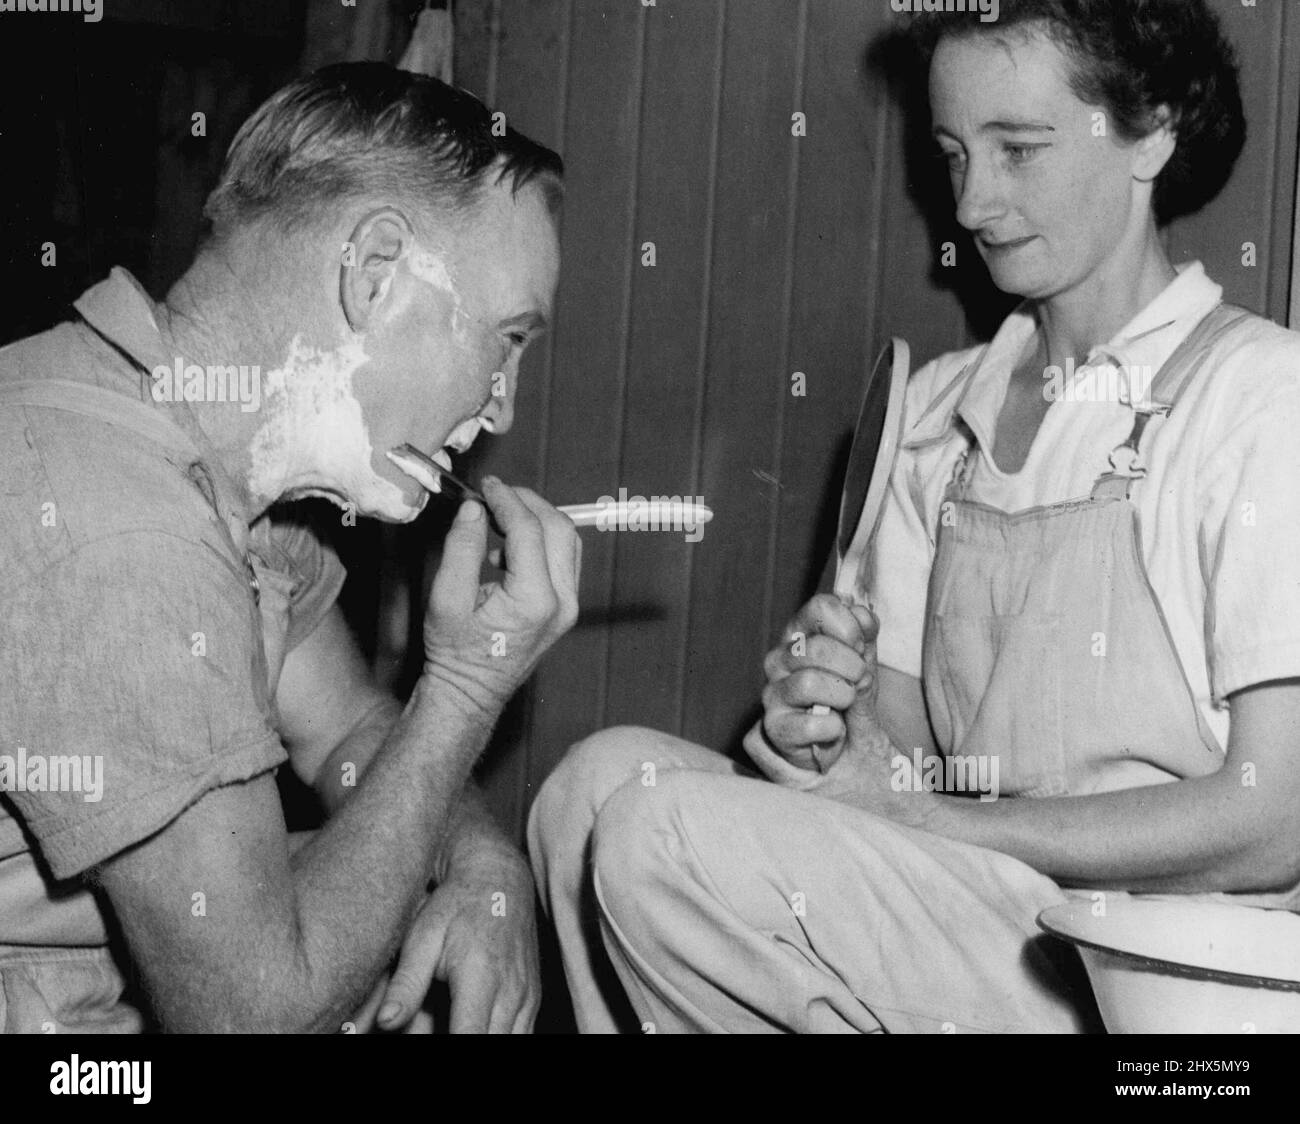 Left: A Shaving problem was solved for Adrian Anderson, of Old Toongabble, when Nida Rixon, of Gerringong, held a mirror for him outside the horse boxes at the Royal Show. March 15, 1951. Stock Photo